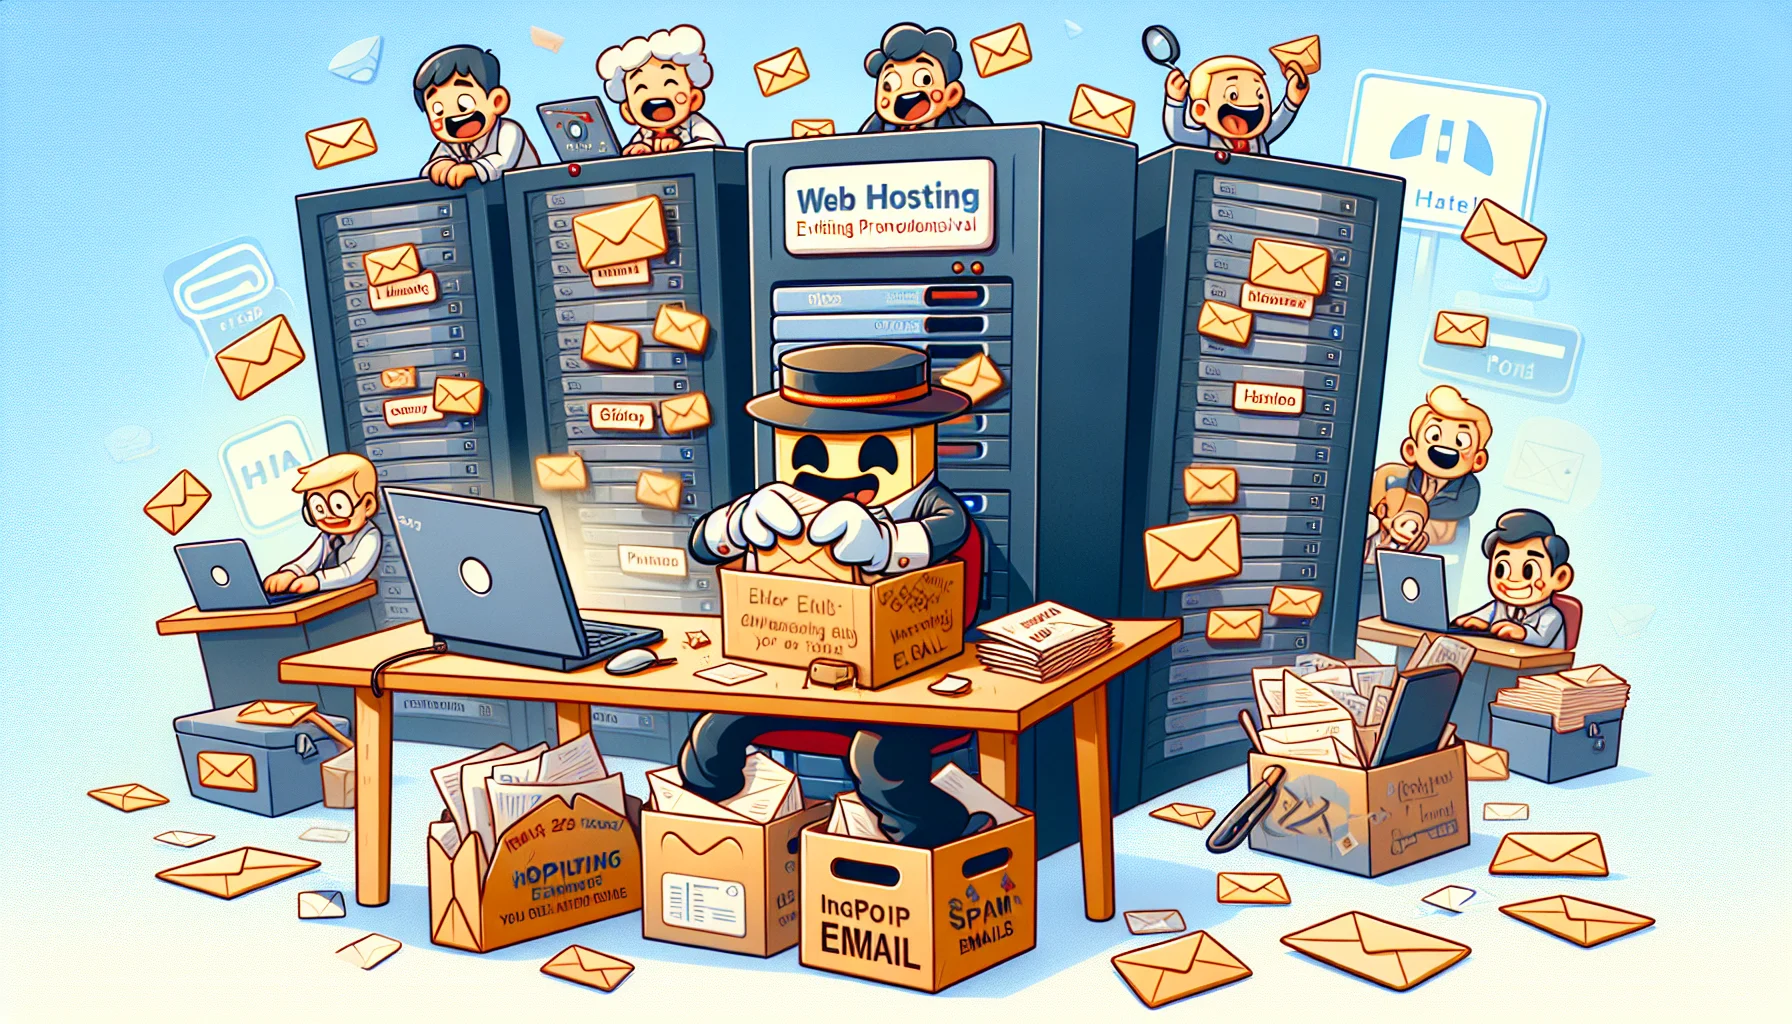 Illustrate a humorous scene related to web hosting with a focus on cPanel email. Consider featuring a virtual office setting, where cartoonish computer servers are working like office employees, managing and organizing emails. Each server has a different personality and emotion, reflecting the nature of their email tasks. Some are happy and enthusiast, dealing with inviting promotional emails while others appear overwhelmed with the influx of spam emails. The key image is of a server dressed humorously as a postmaster, with a hat and a bag, sifting carefully through a pile of digital envelopes. The background shows logos related to web hosting but no specific brands.